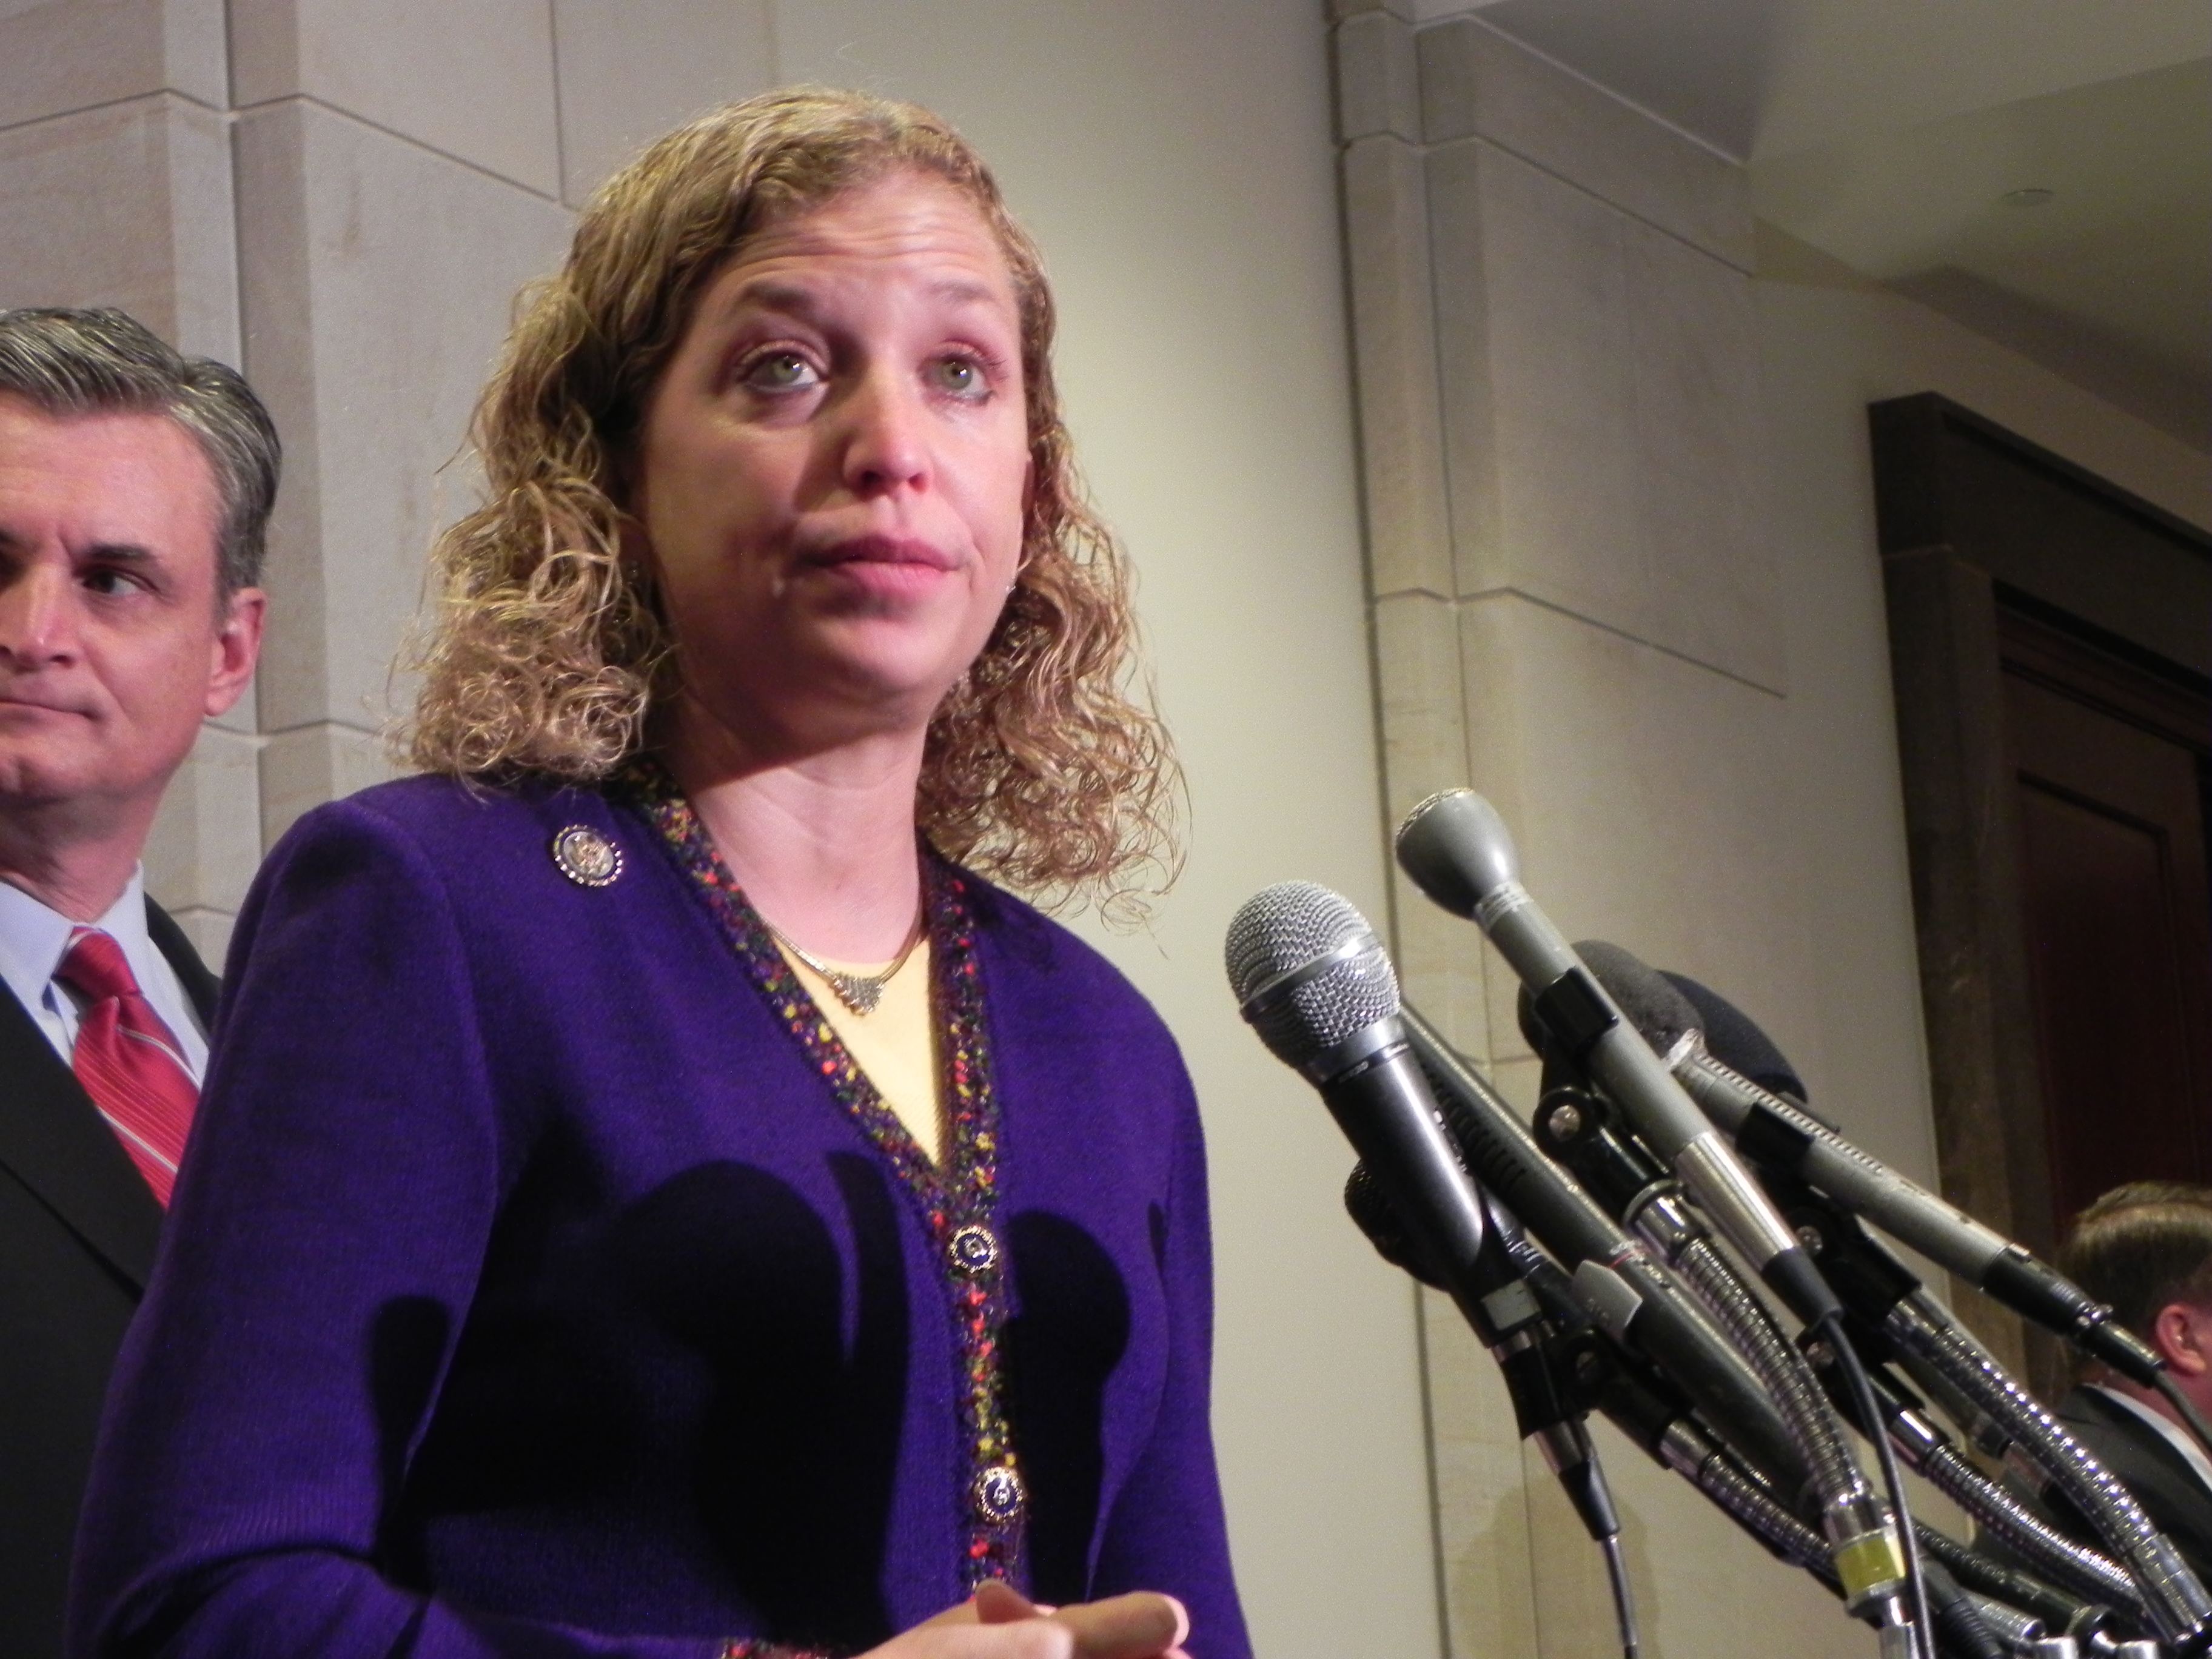 DNC And Debbie Wasserman Schultz Give Ambivalent Clintonites The Holiday Bern